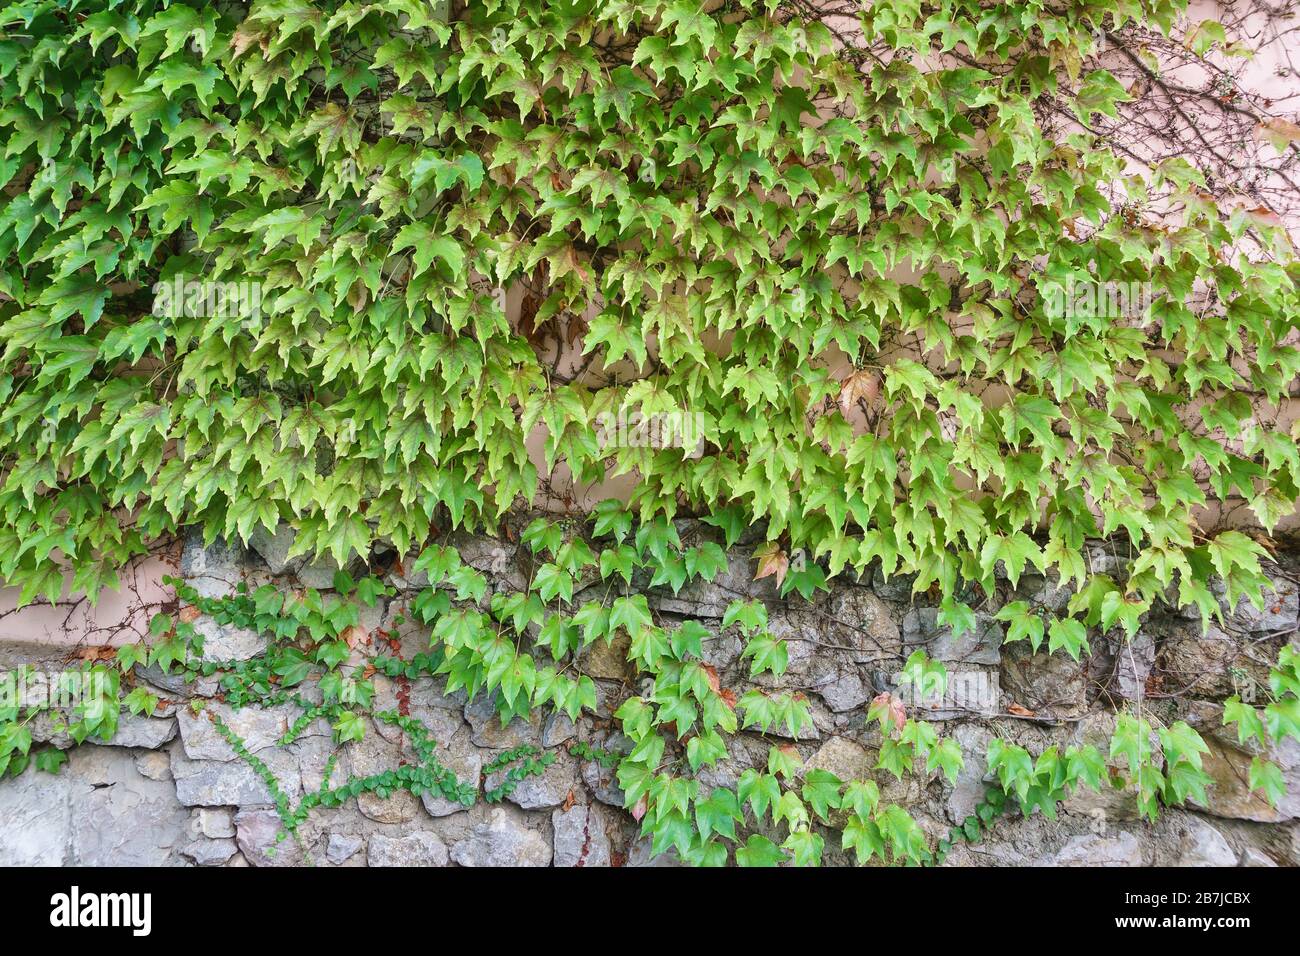 Ivy (lat. Hedera) and Virginia creeper (Parthenocissus quinquefolia) on a stone wall. Natural background Stock Photo